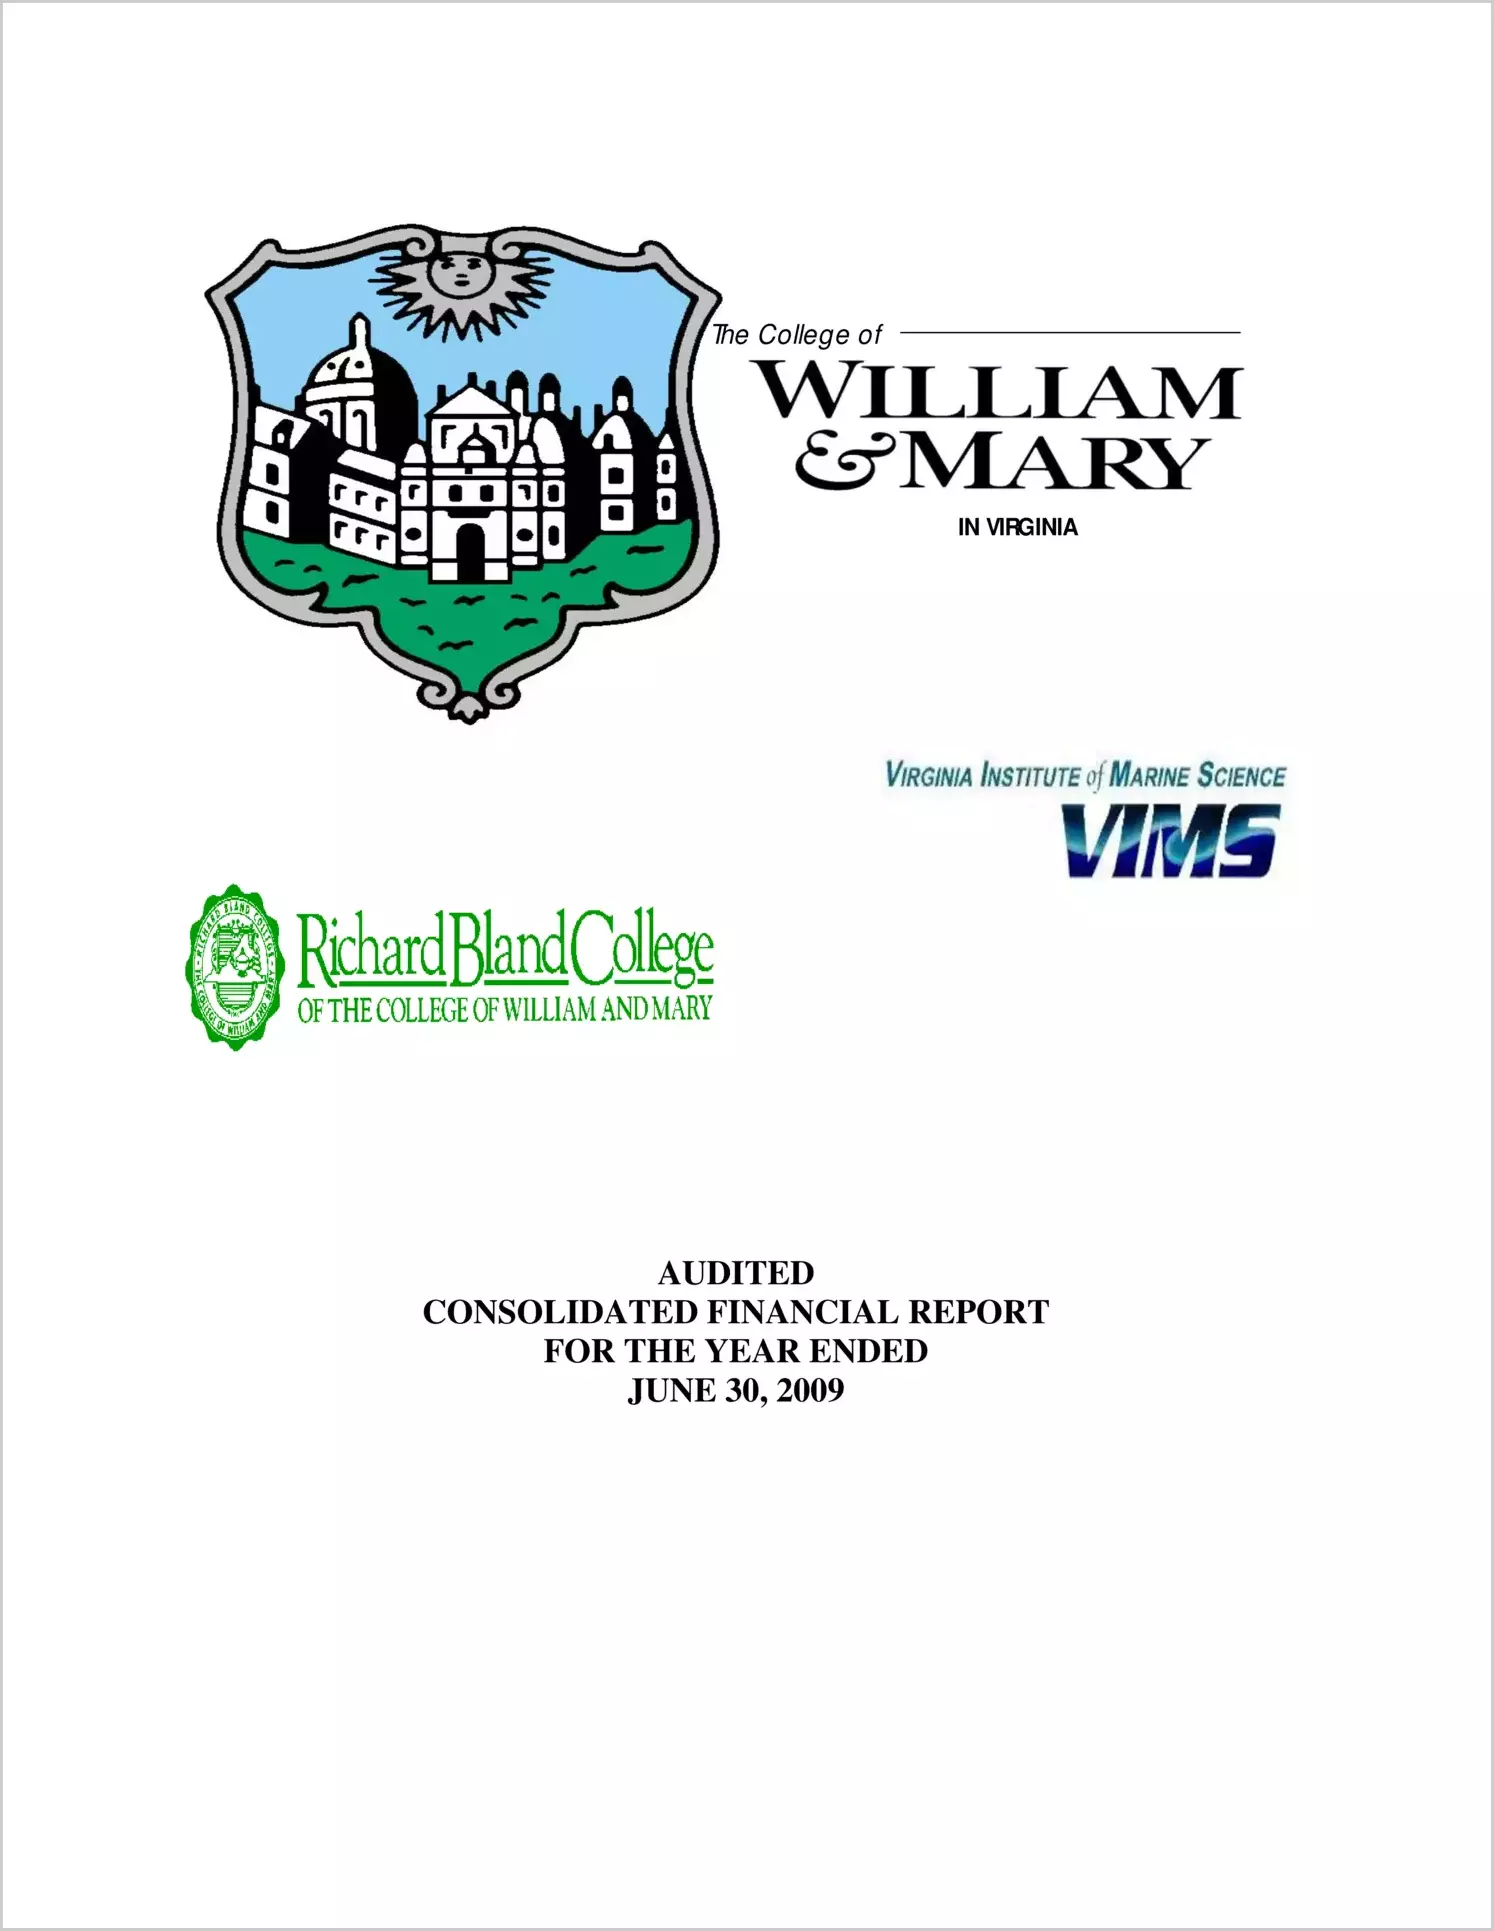 William & Mary, Virginia Institute of Marine Science, and Richard Bland College Financial Statements for the year ended June 30, 2009